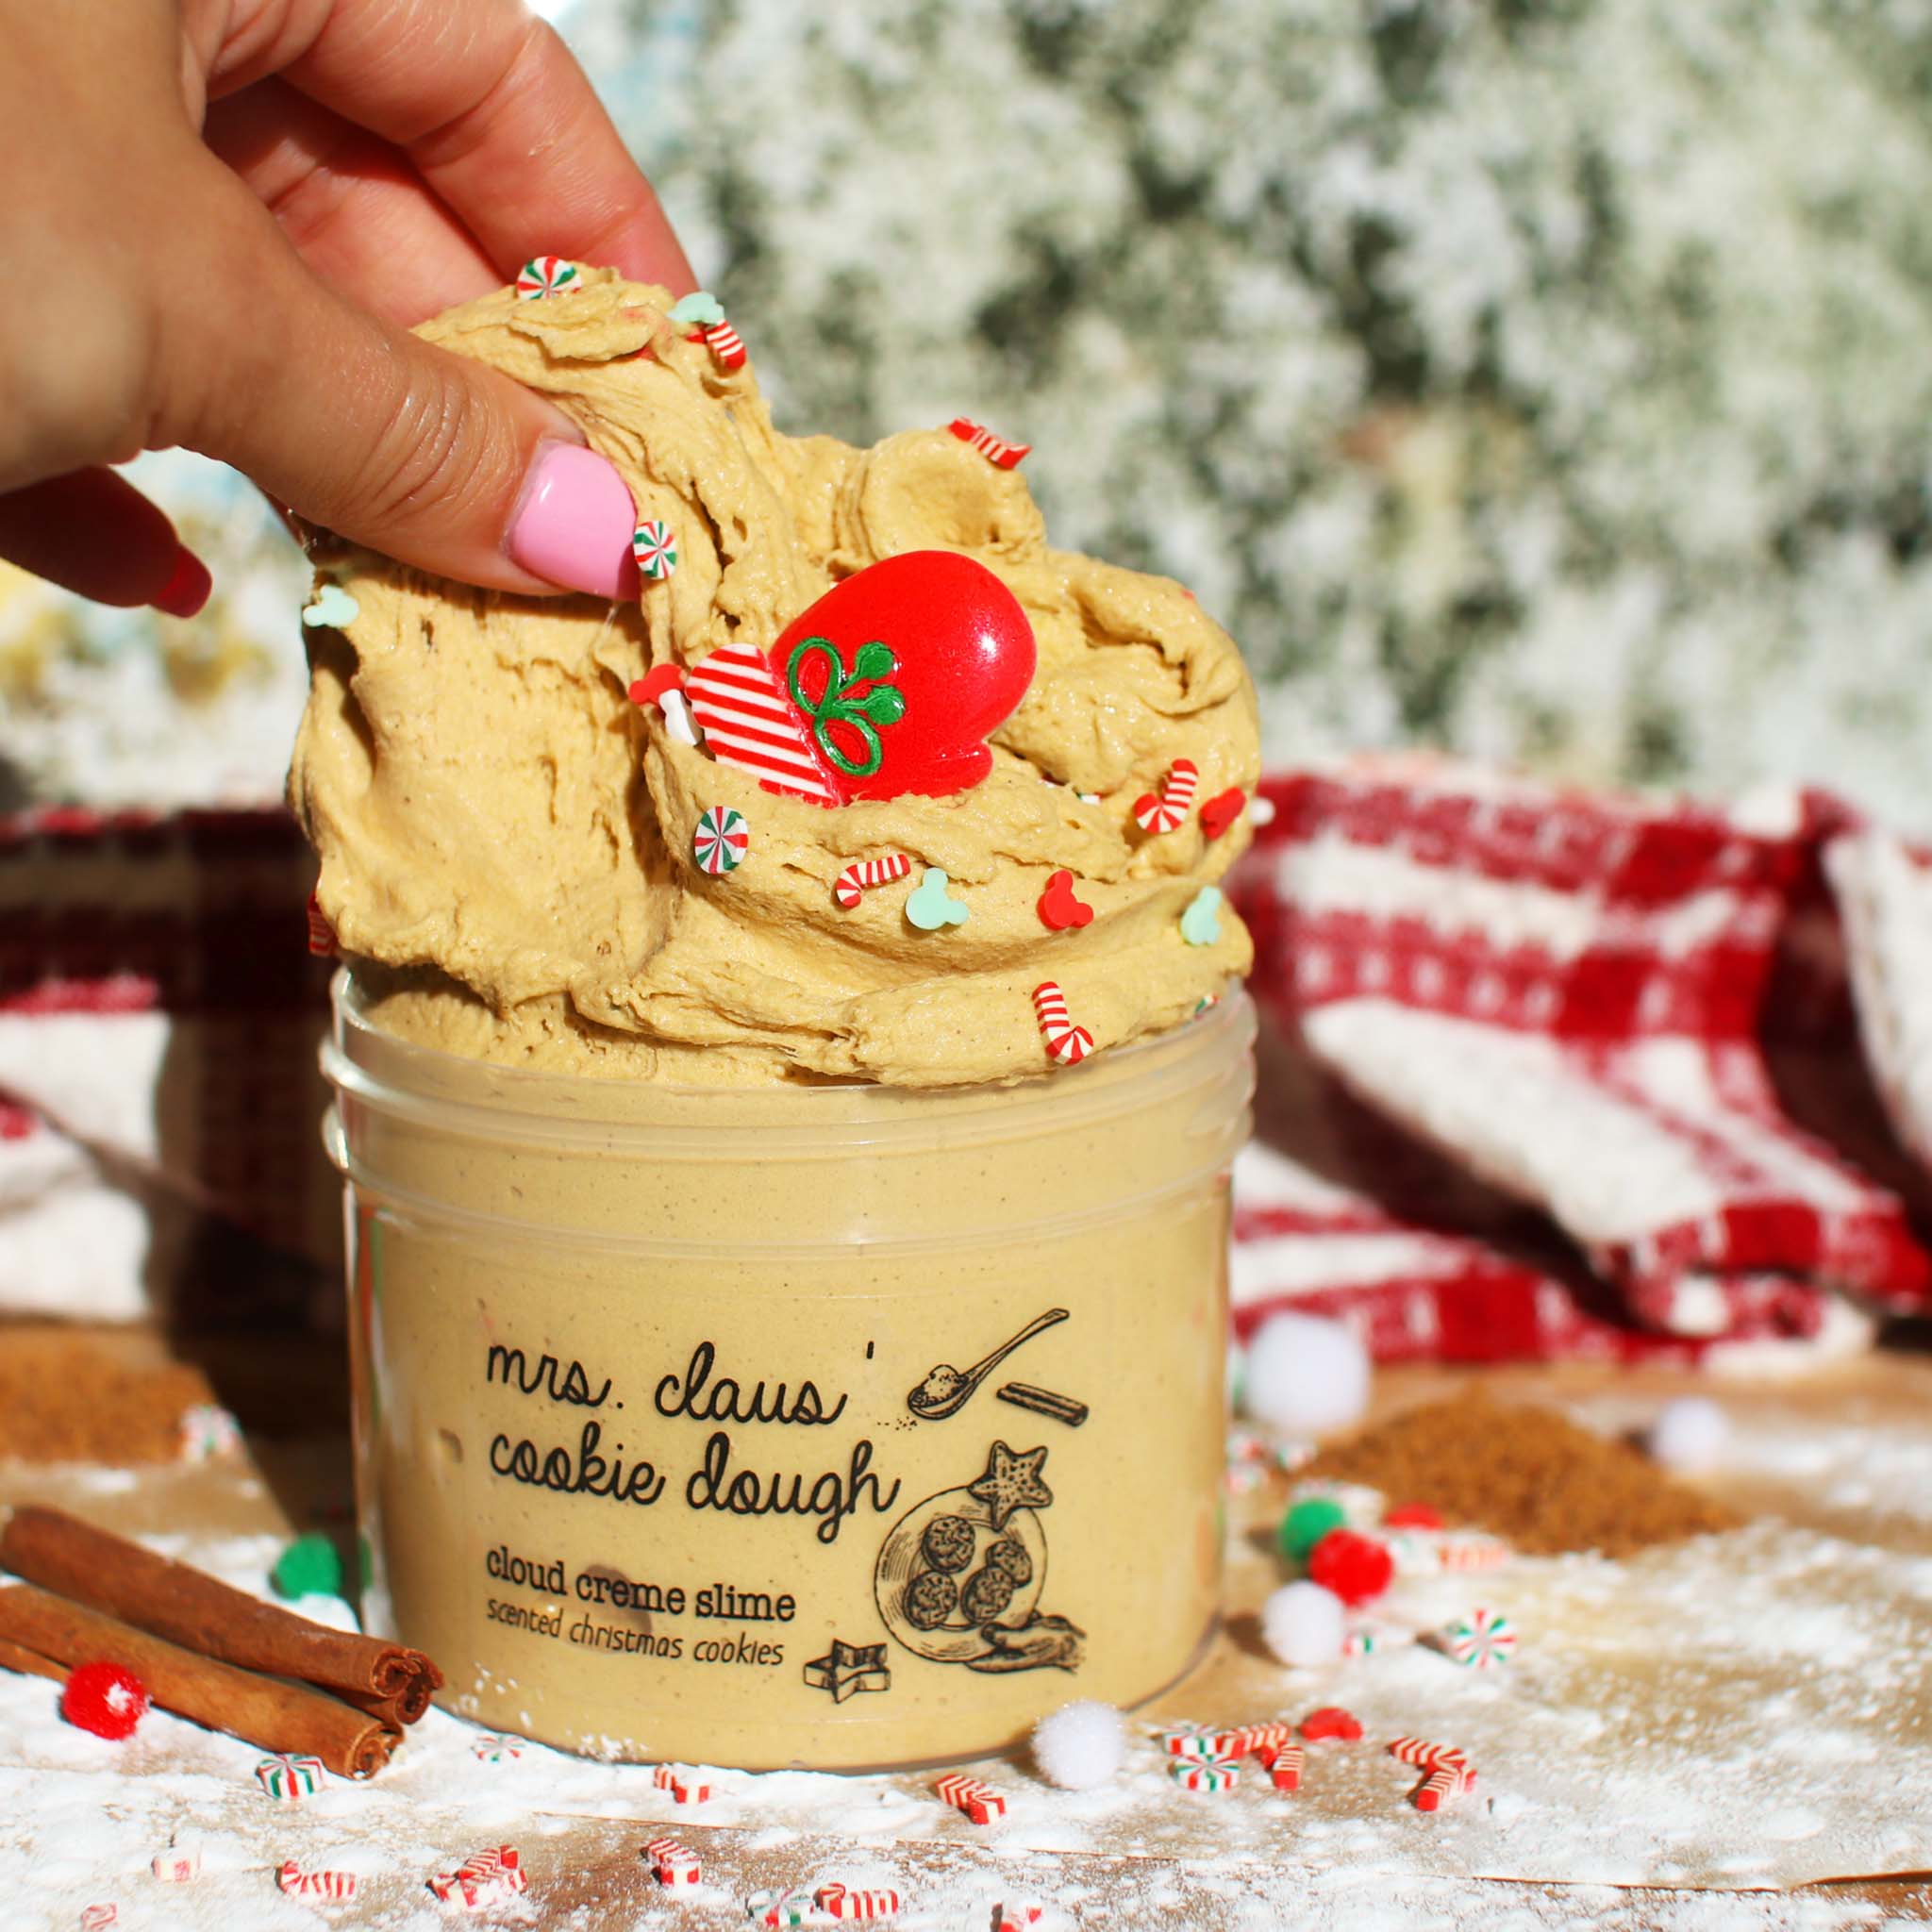 Mrs Claus Cookie Dough Christmas Slime Gift For Kids Brown Cinnamon Bakery Scented Clay Creamy Cloud Cream Butter Snow Slime Fantasies Shop 9oz Front View Decoration Pull